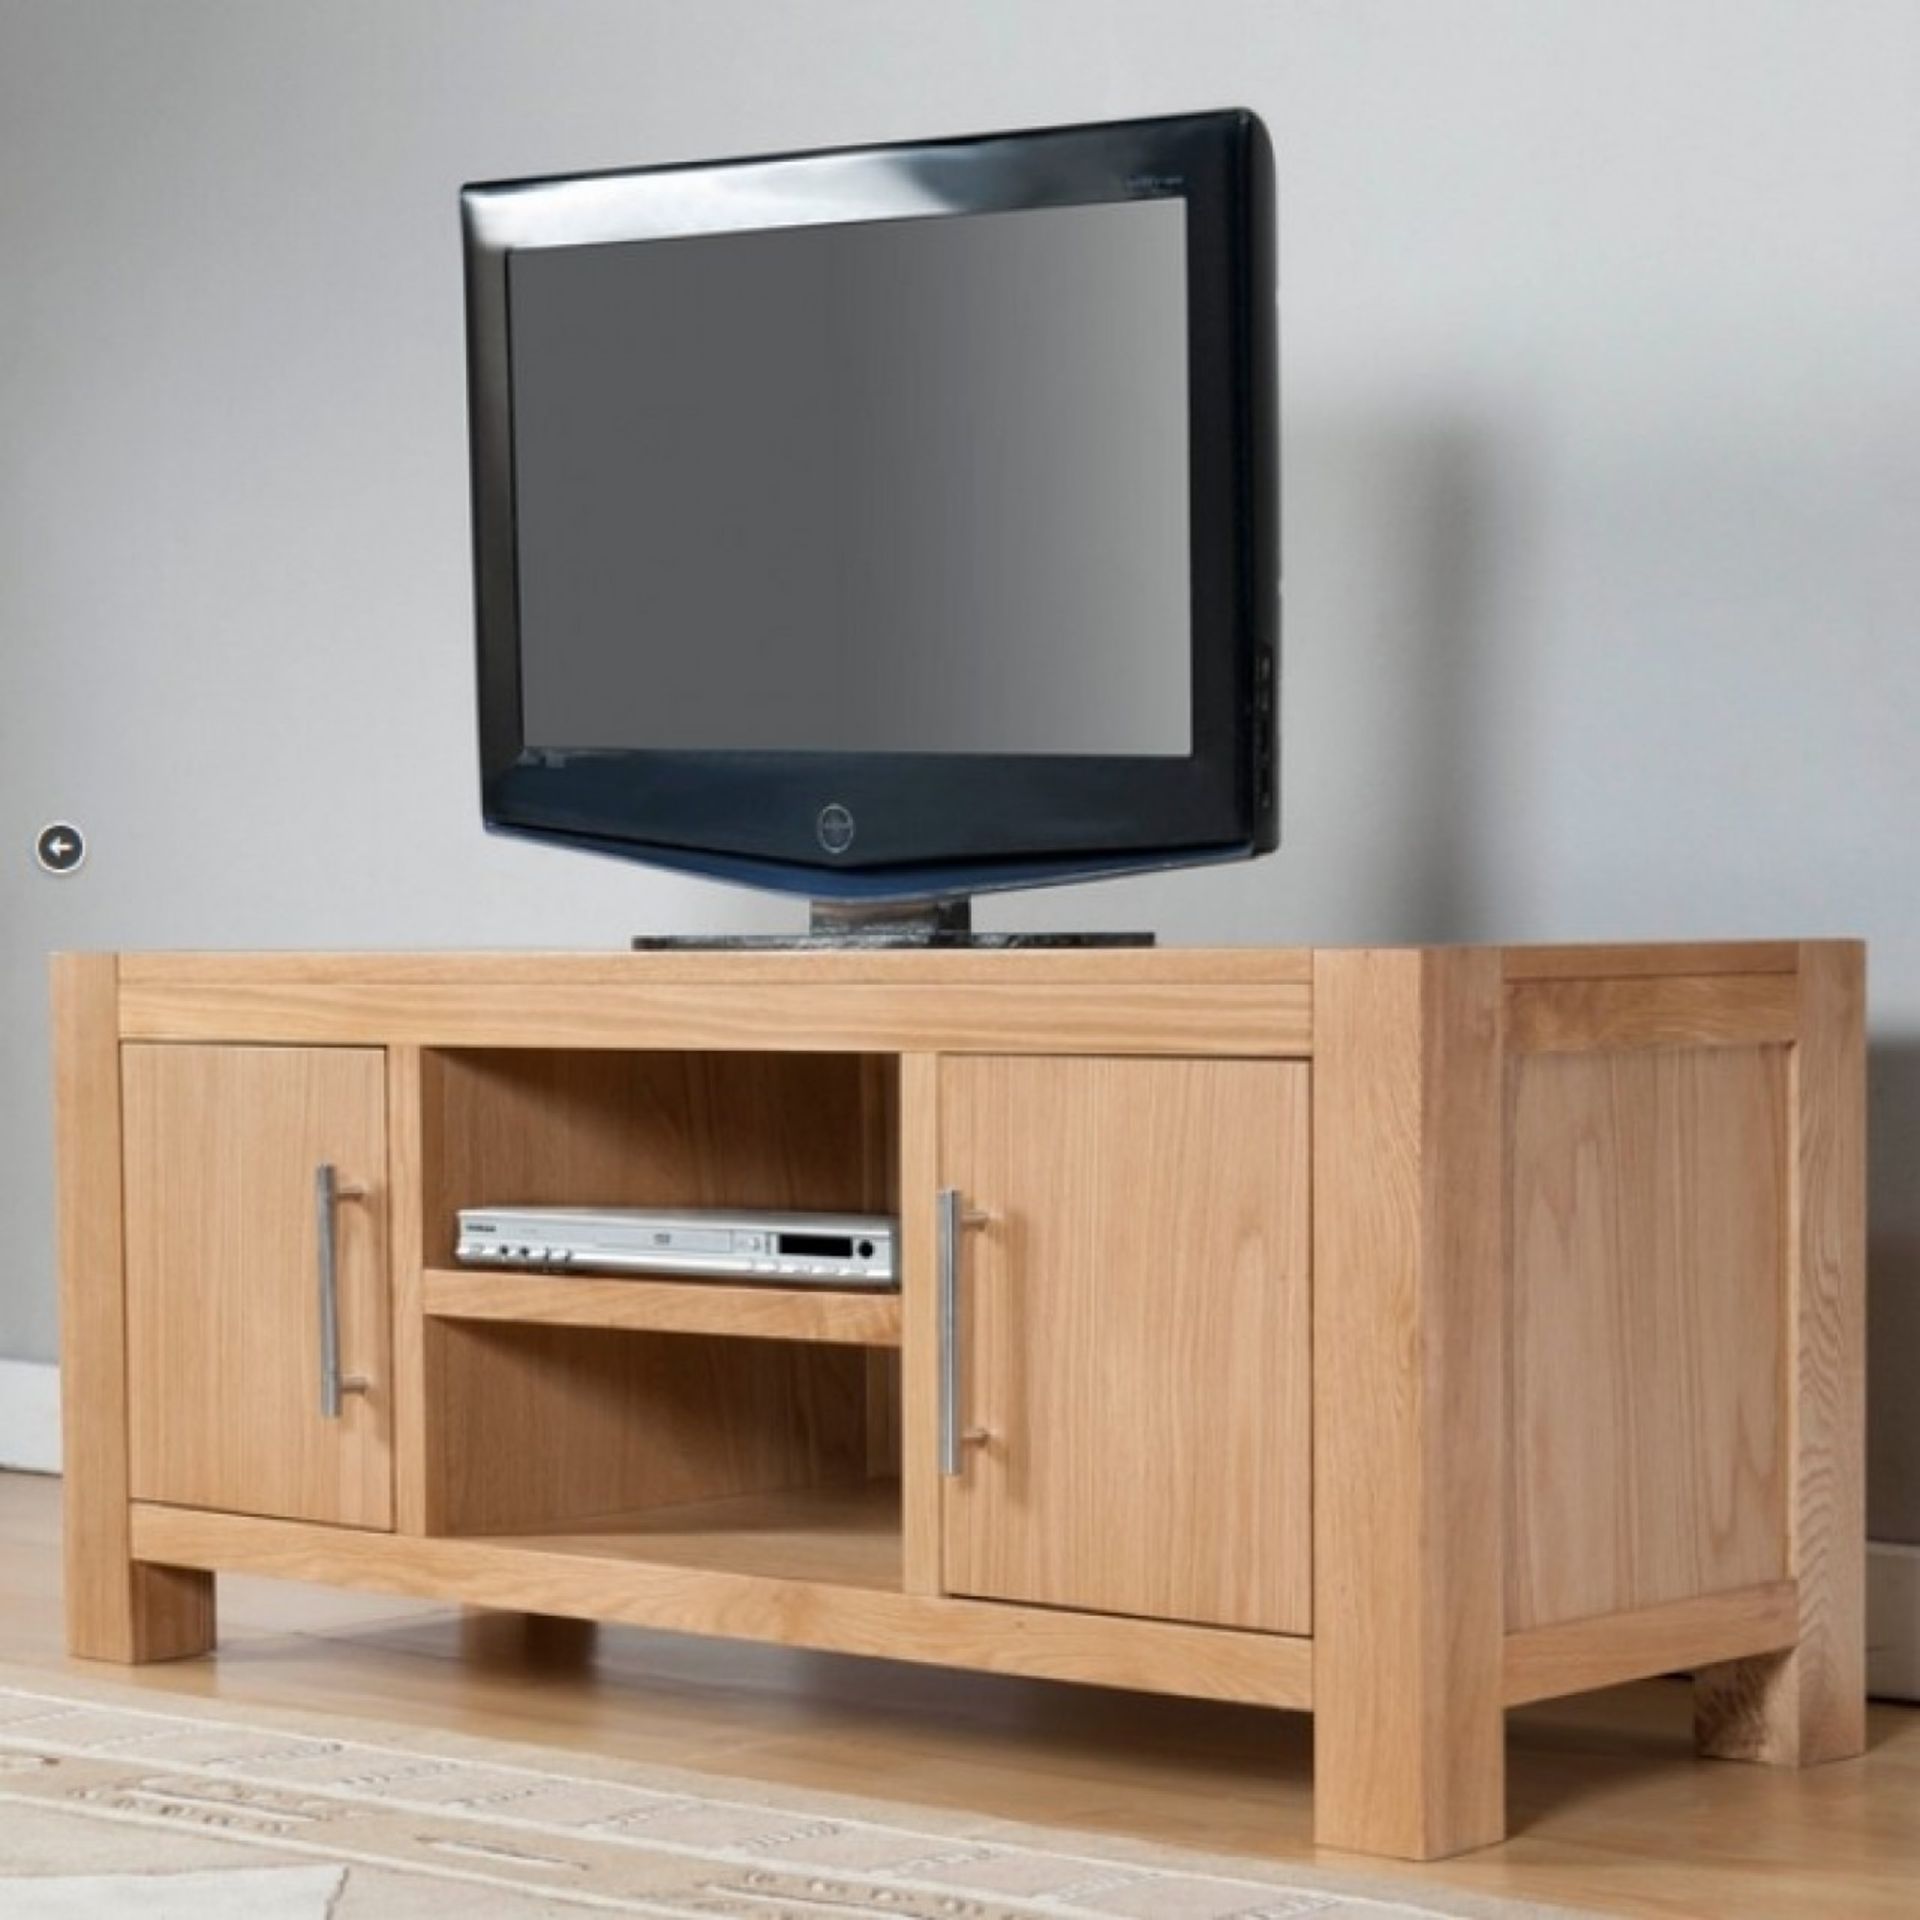 V Grade A Brand New Lucerne Oak TV Chest Cabinet With Two Doors And Two Shelves In The Centre